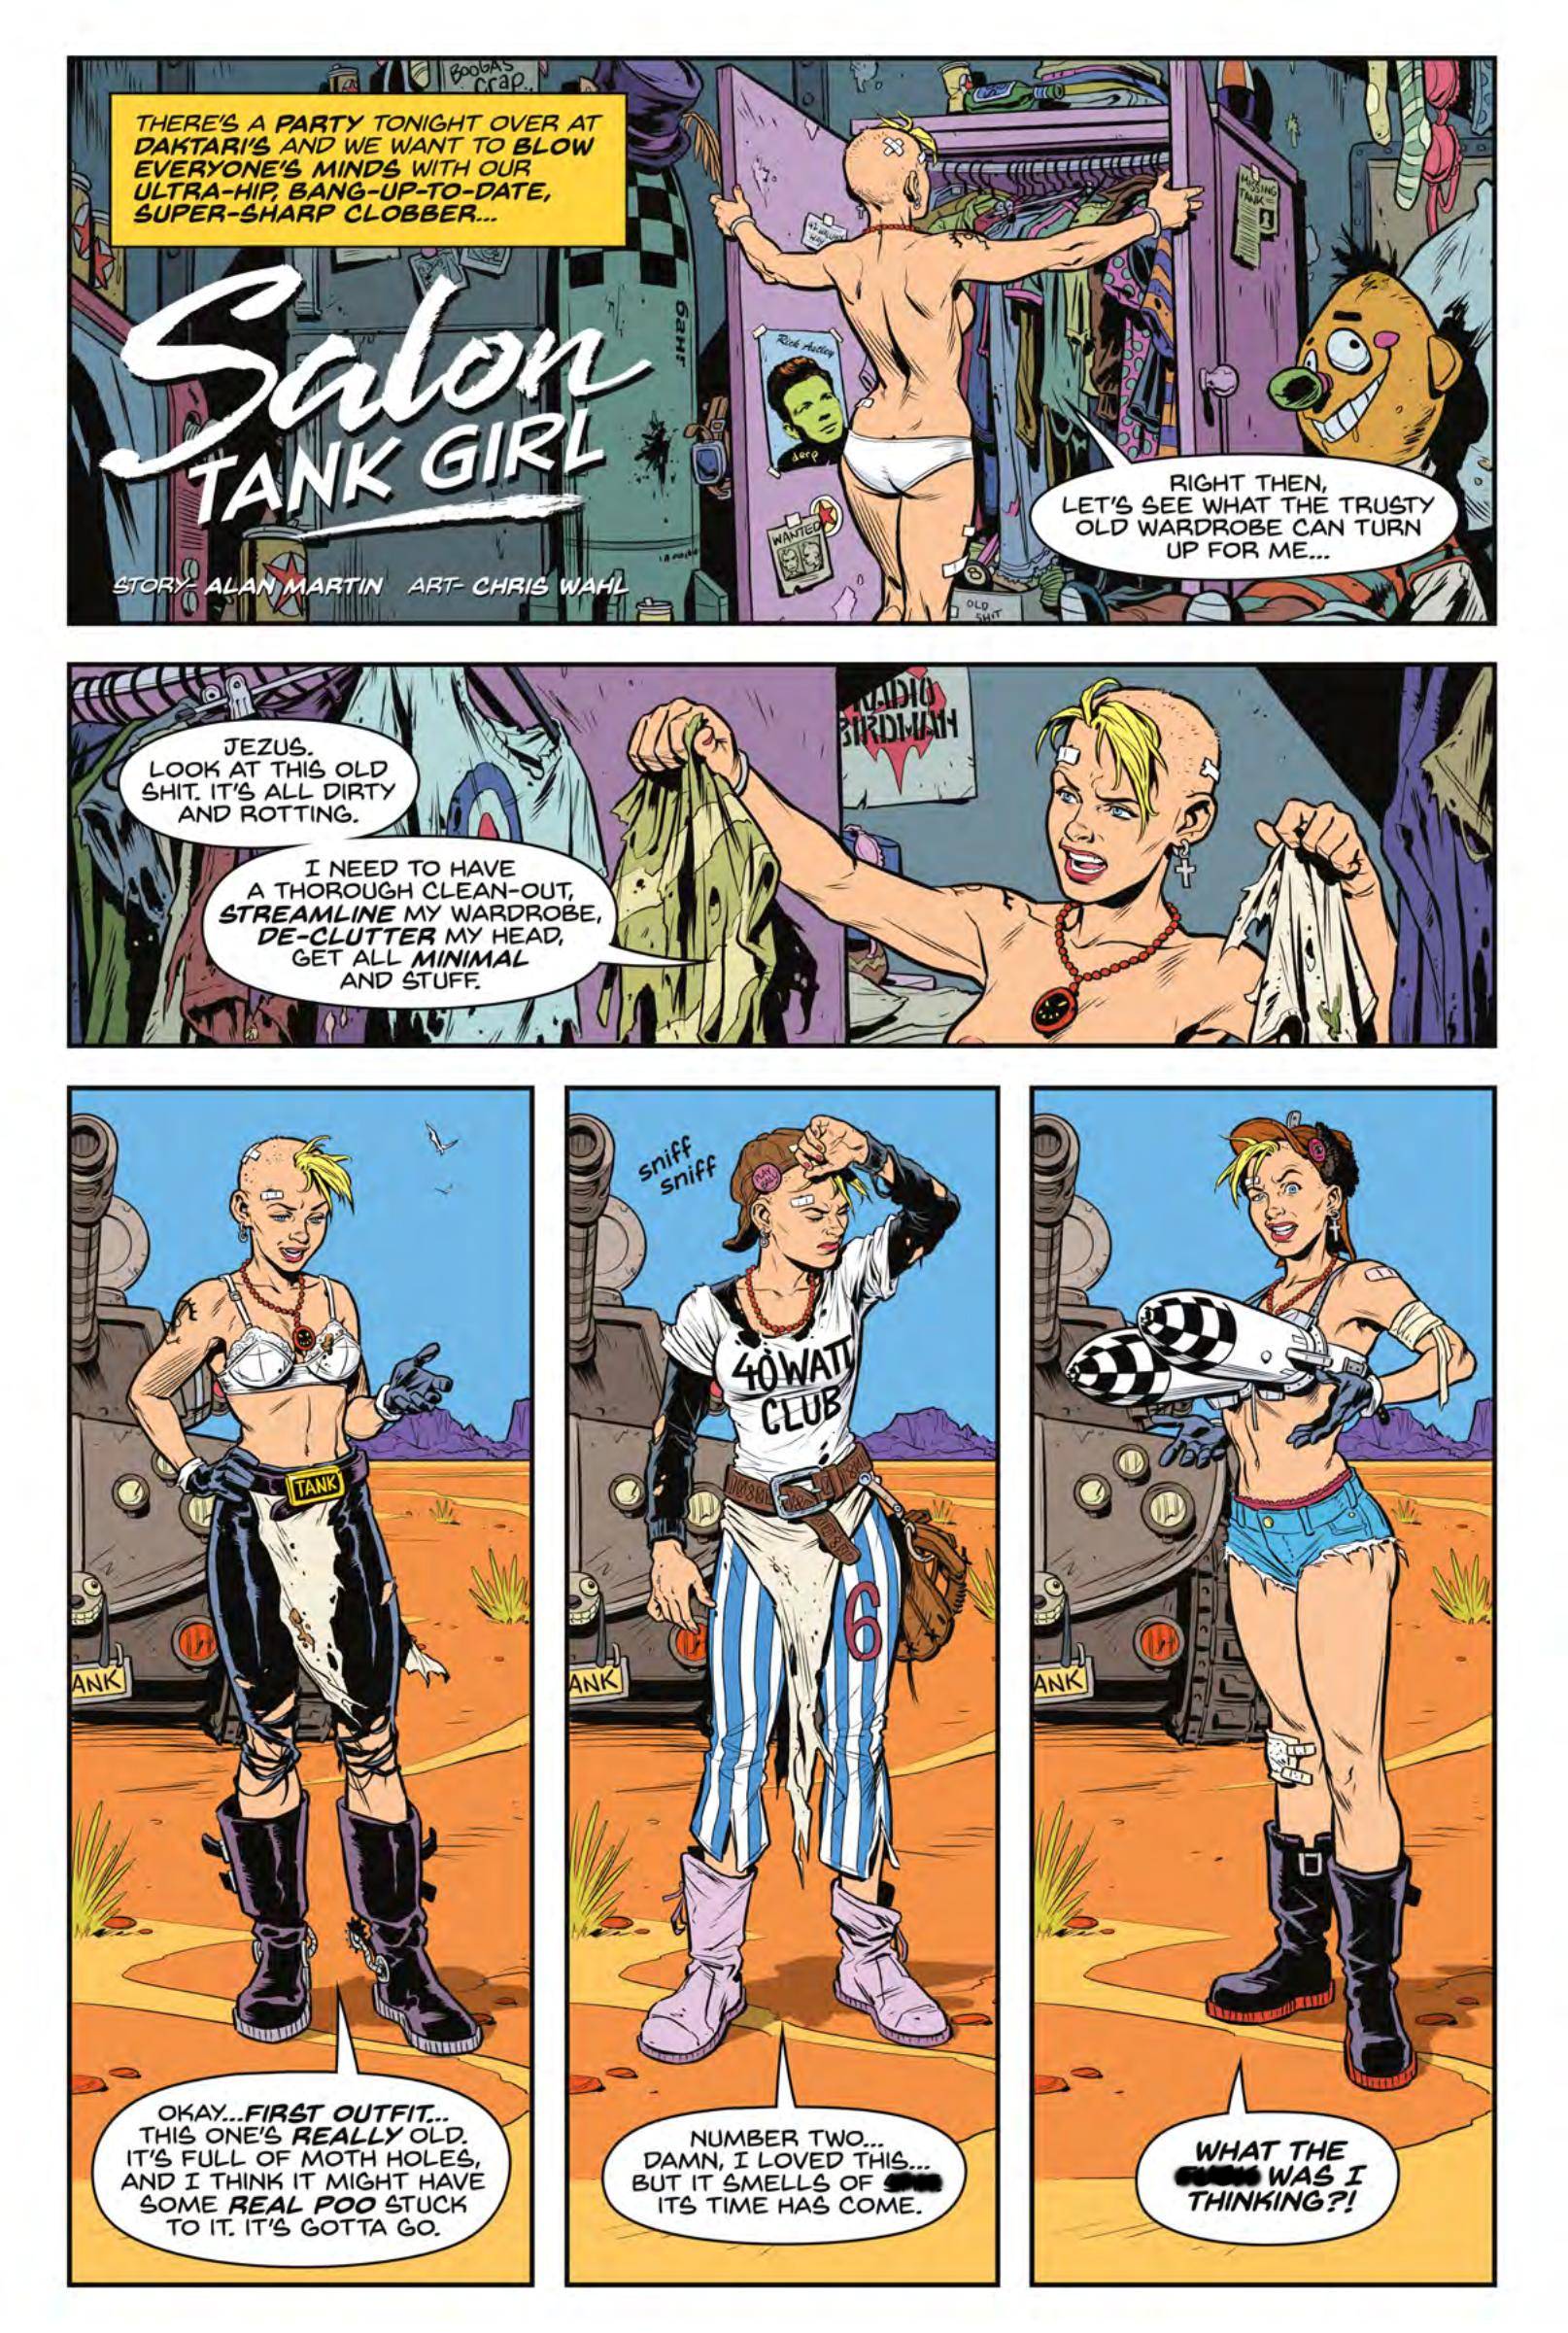 Tank Girl All-Stars review